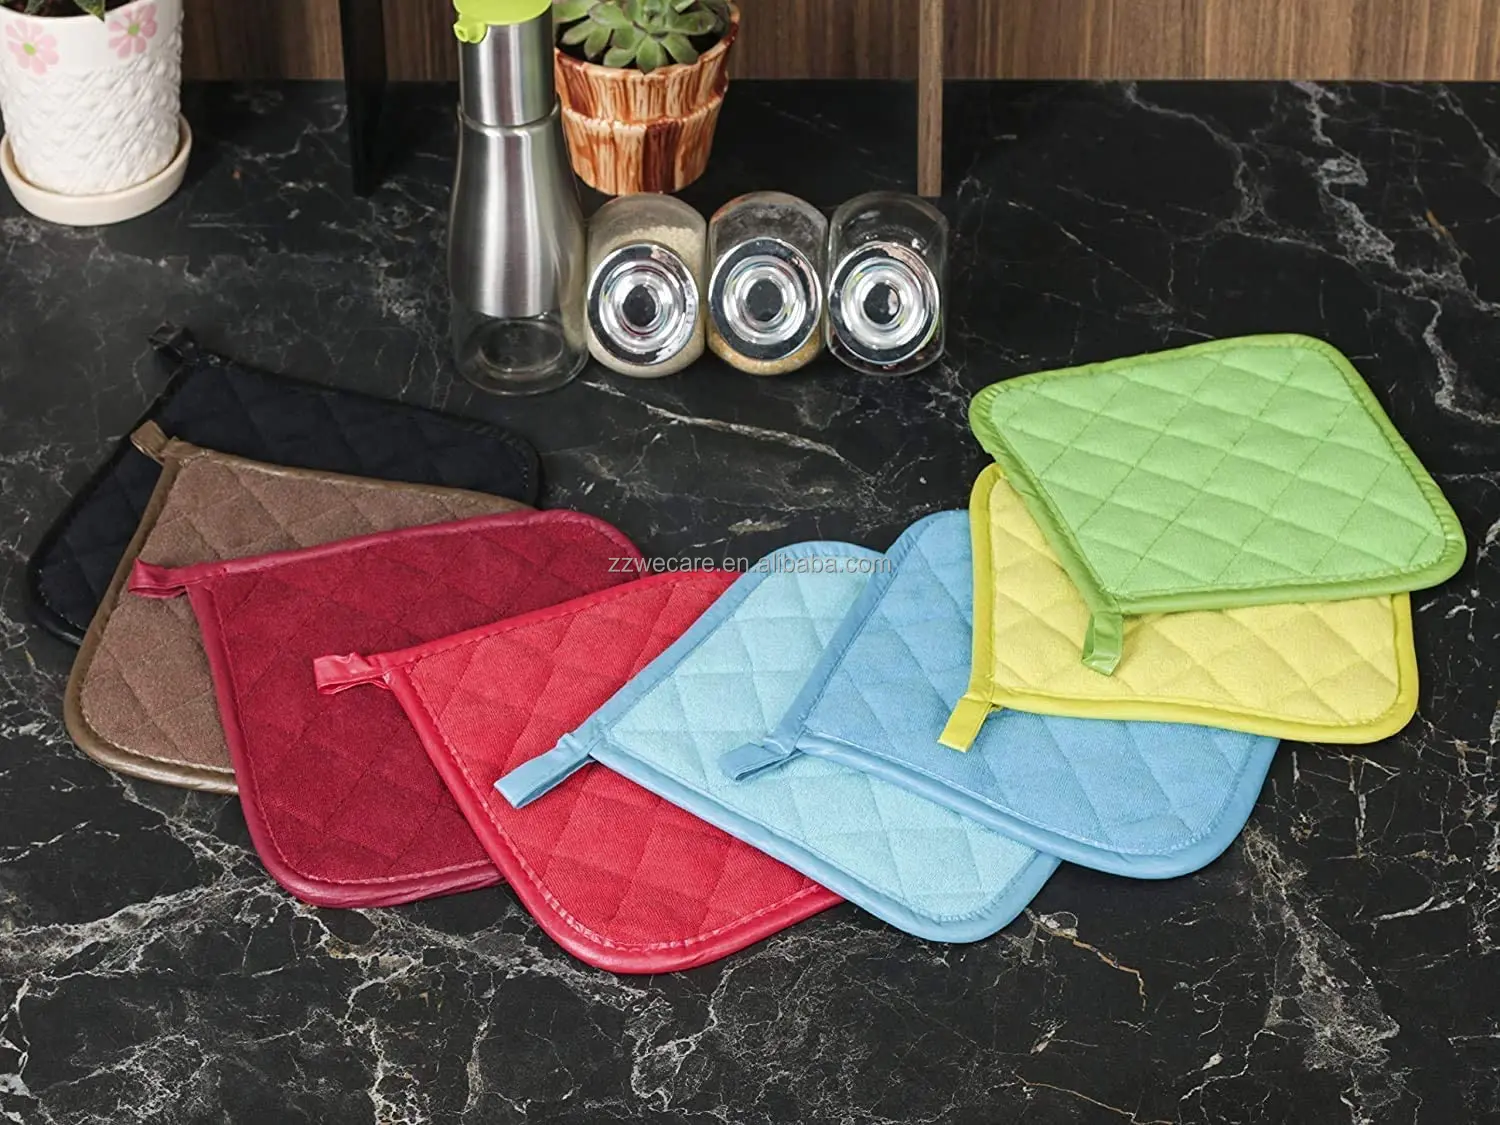 Multipurpose Heat Resistant Kitchen Cooking Baking Accessories Square Hot Pads Table Place Mat Pot Holders